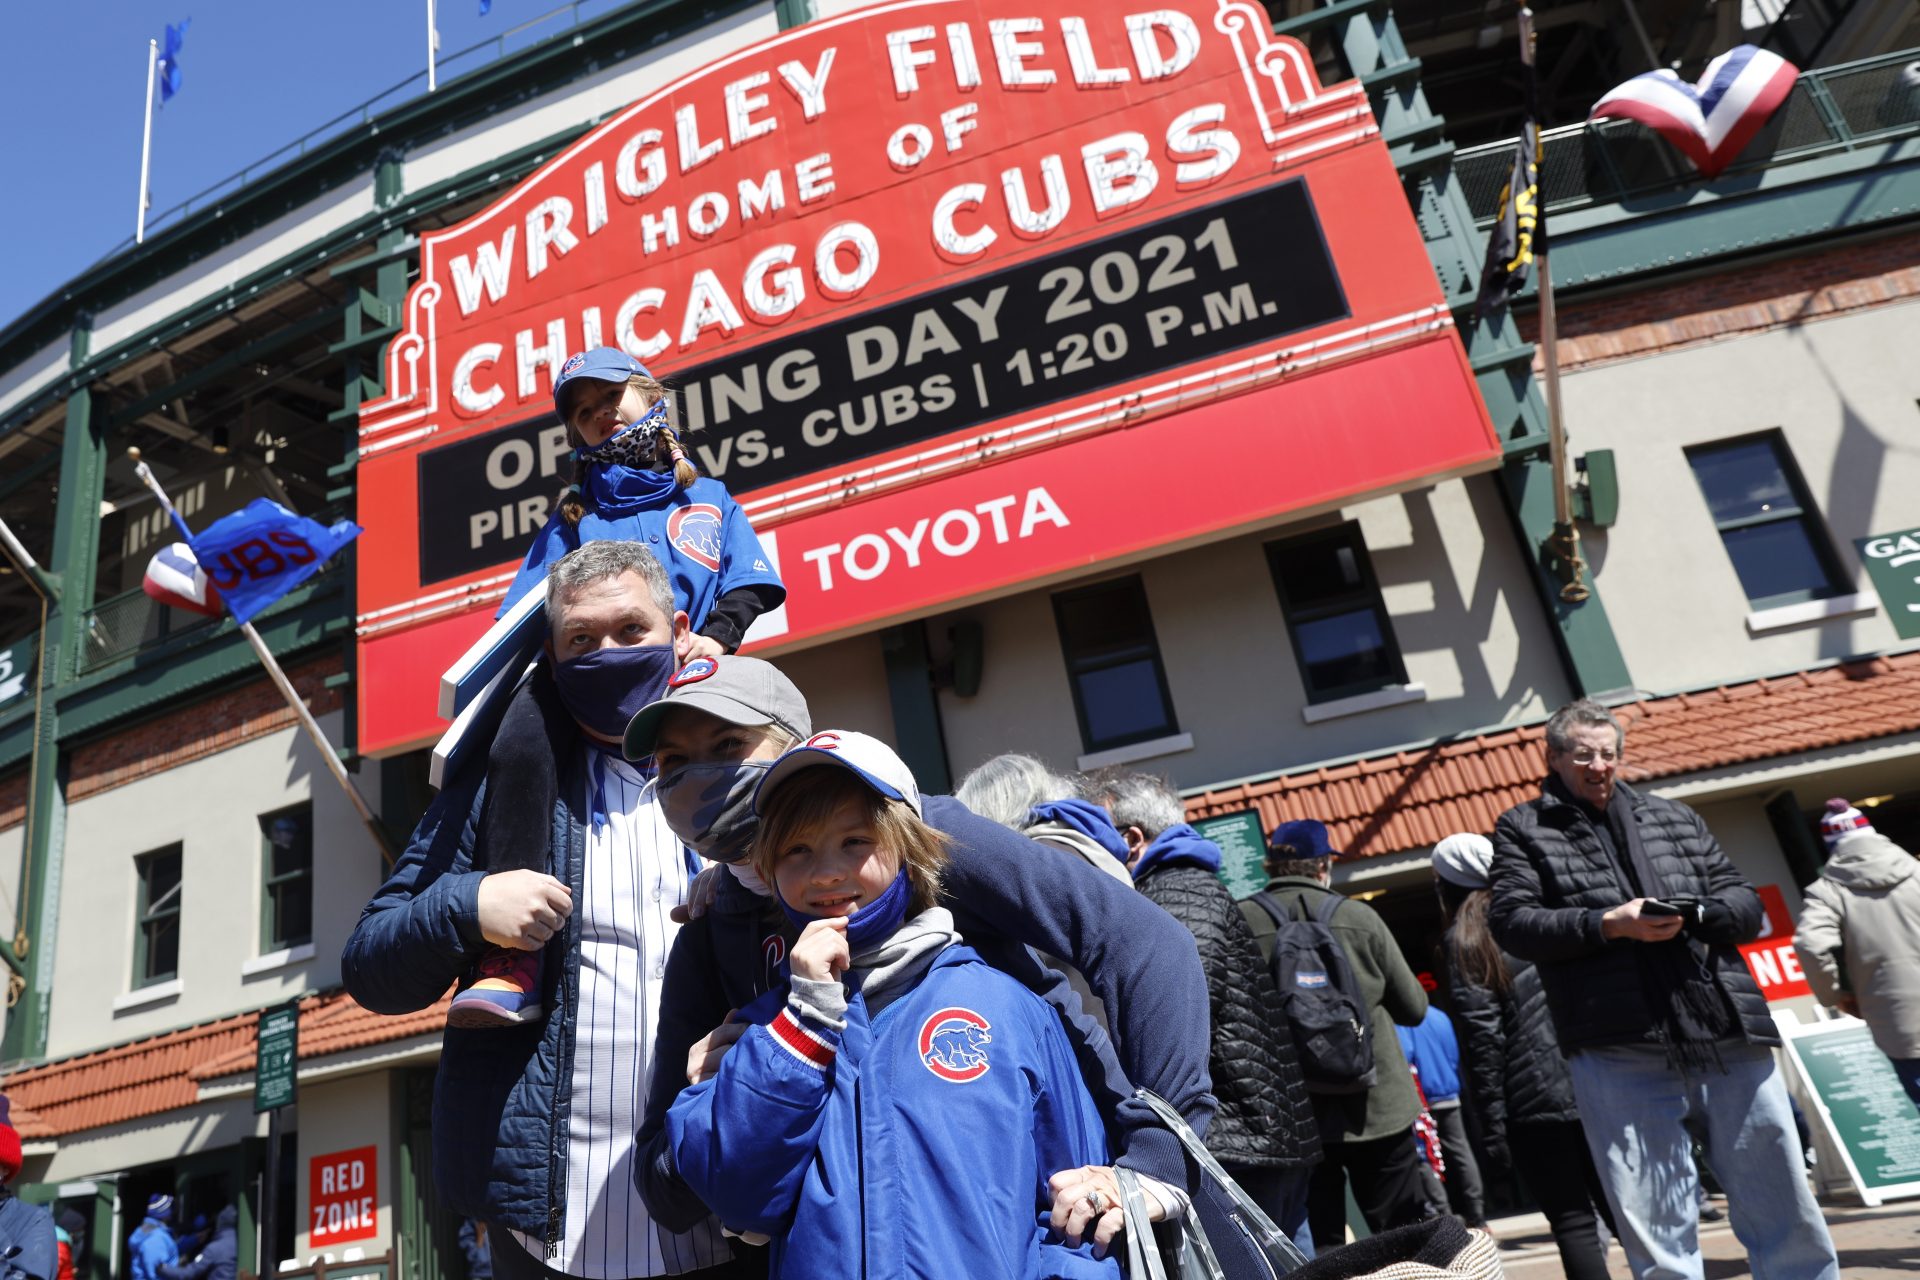 A family poses for a photo outside of Wrigley Field on the opening day baseball game between the Chicago Cubs and the Pittsburgh Pirates, Thursday, April 1, 2021, in Chicago.